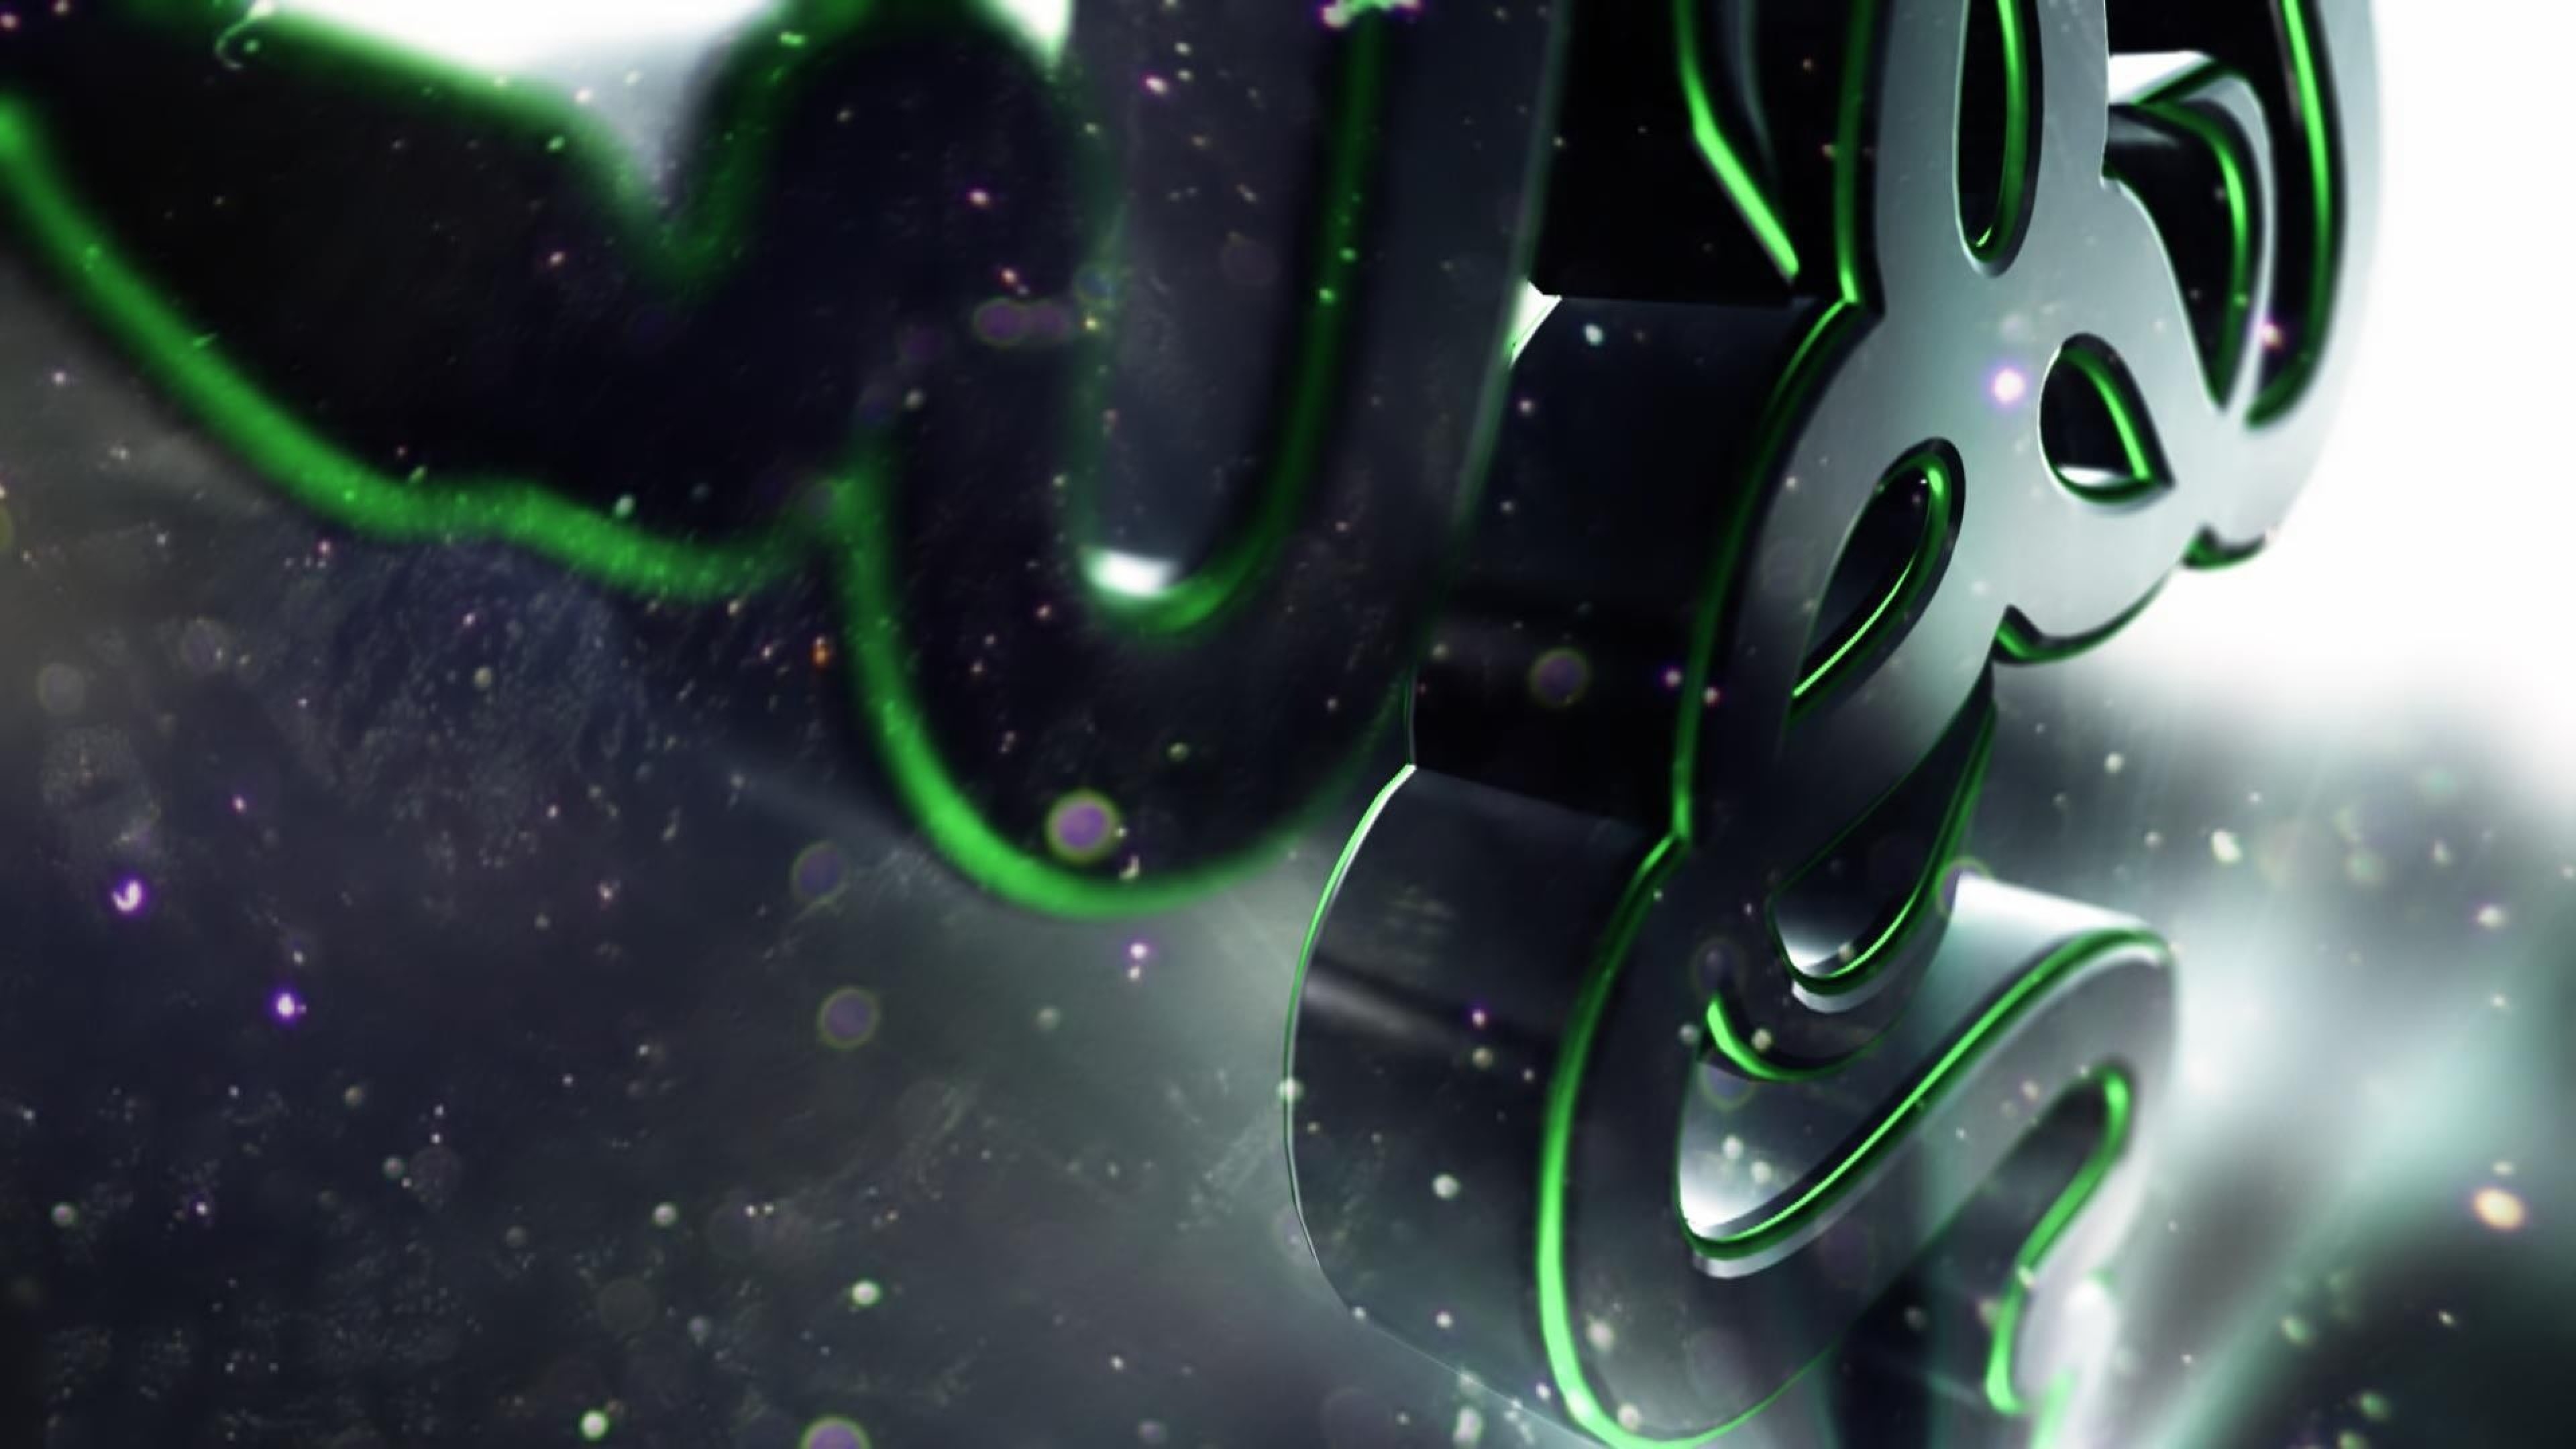 90 Razer HD Wallpapers and Backgrounds